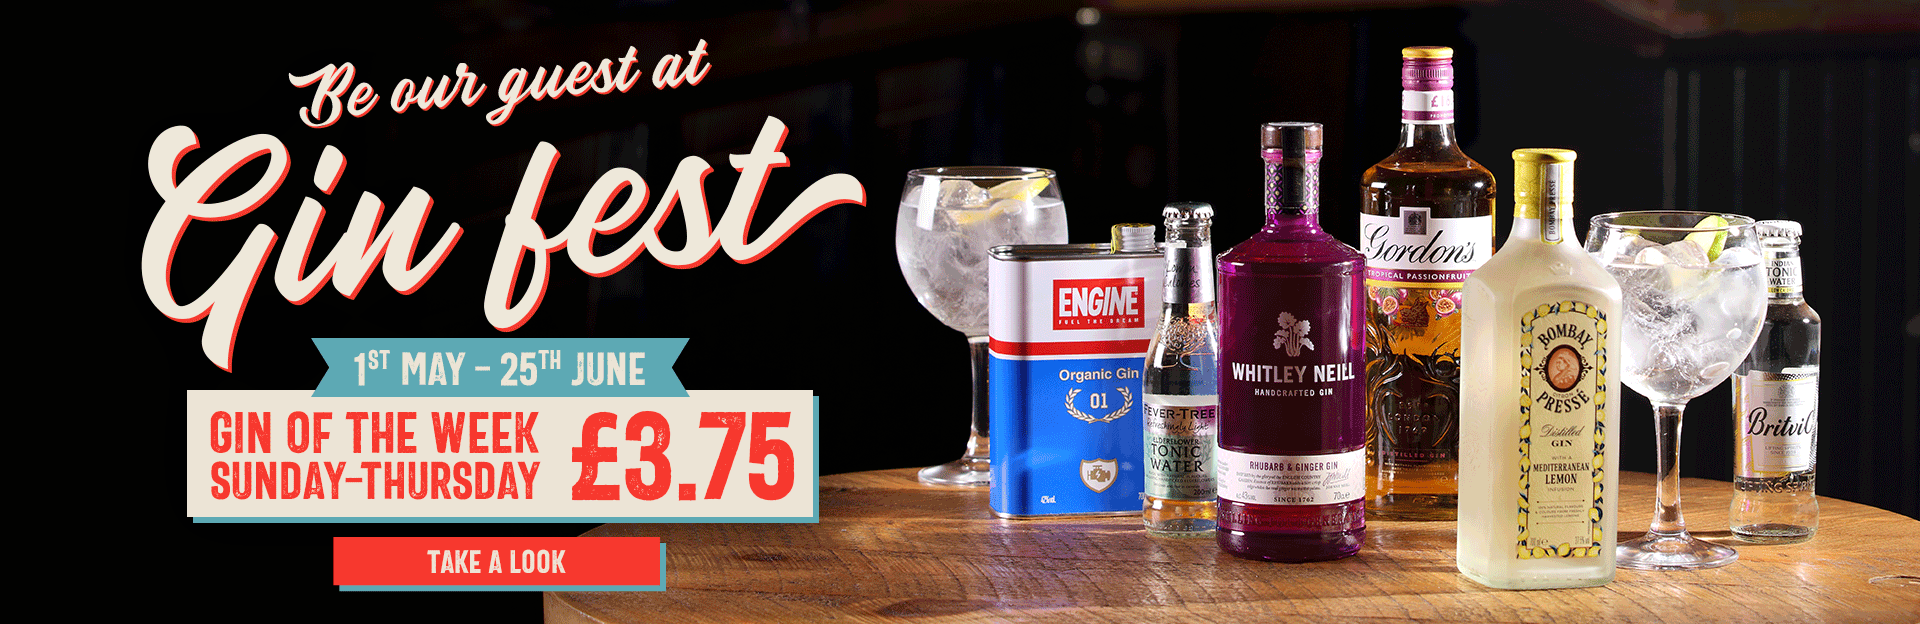 Gin Fest at The Golden Lion